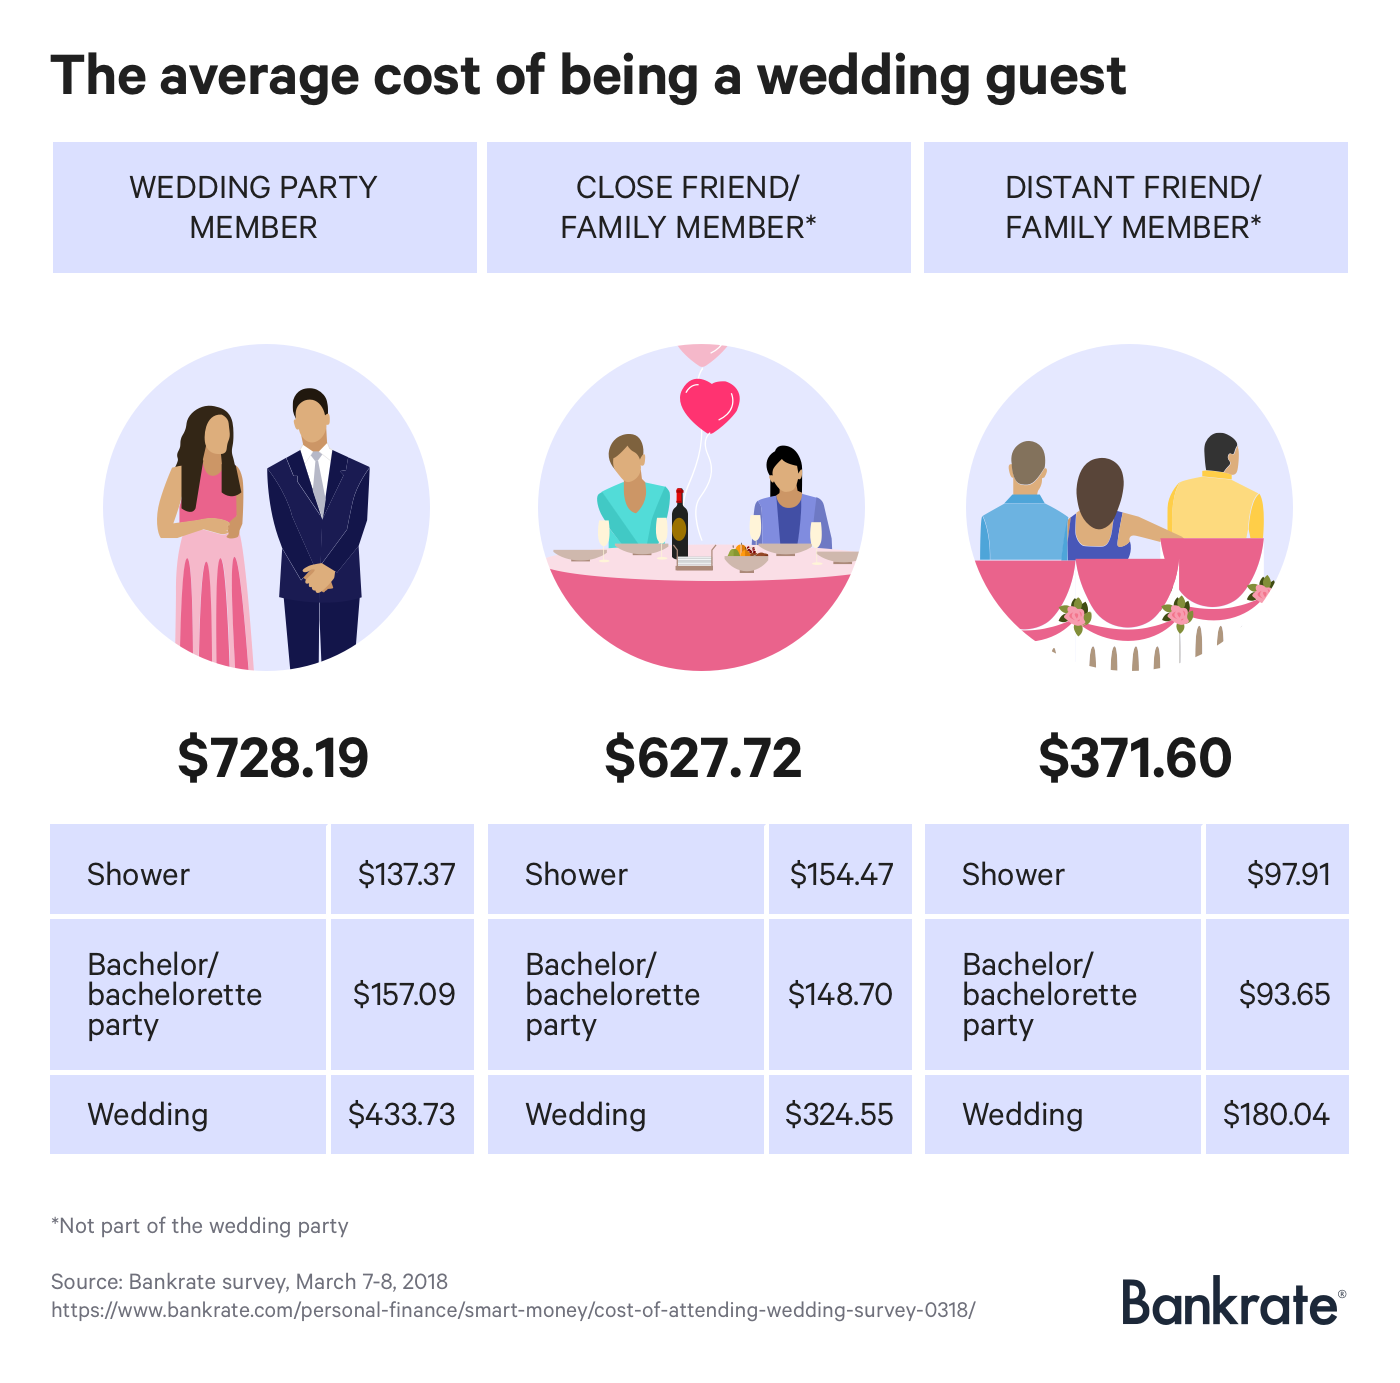 How much does it really cost to be a wedding guest?